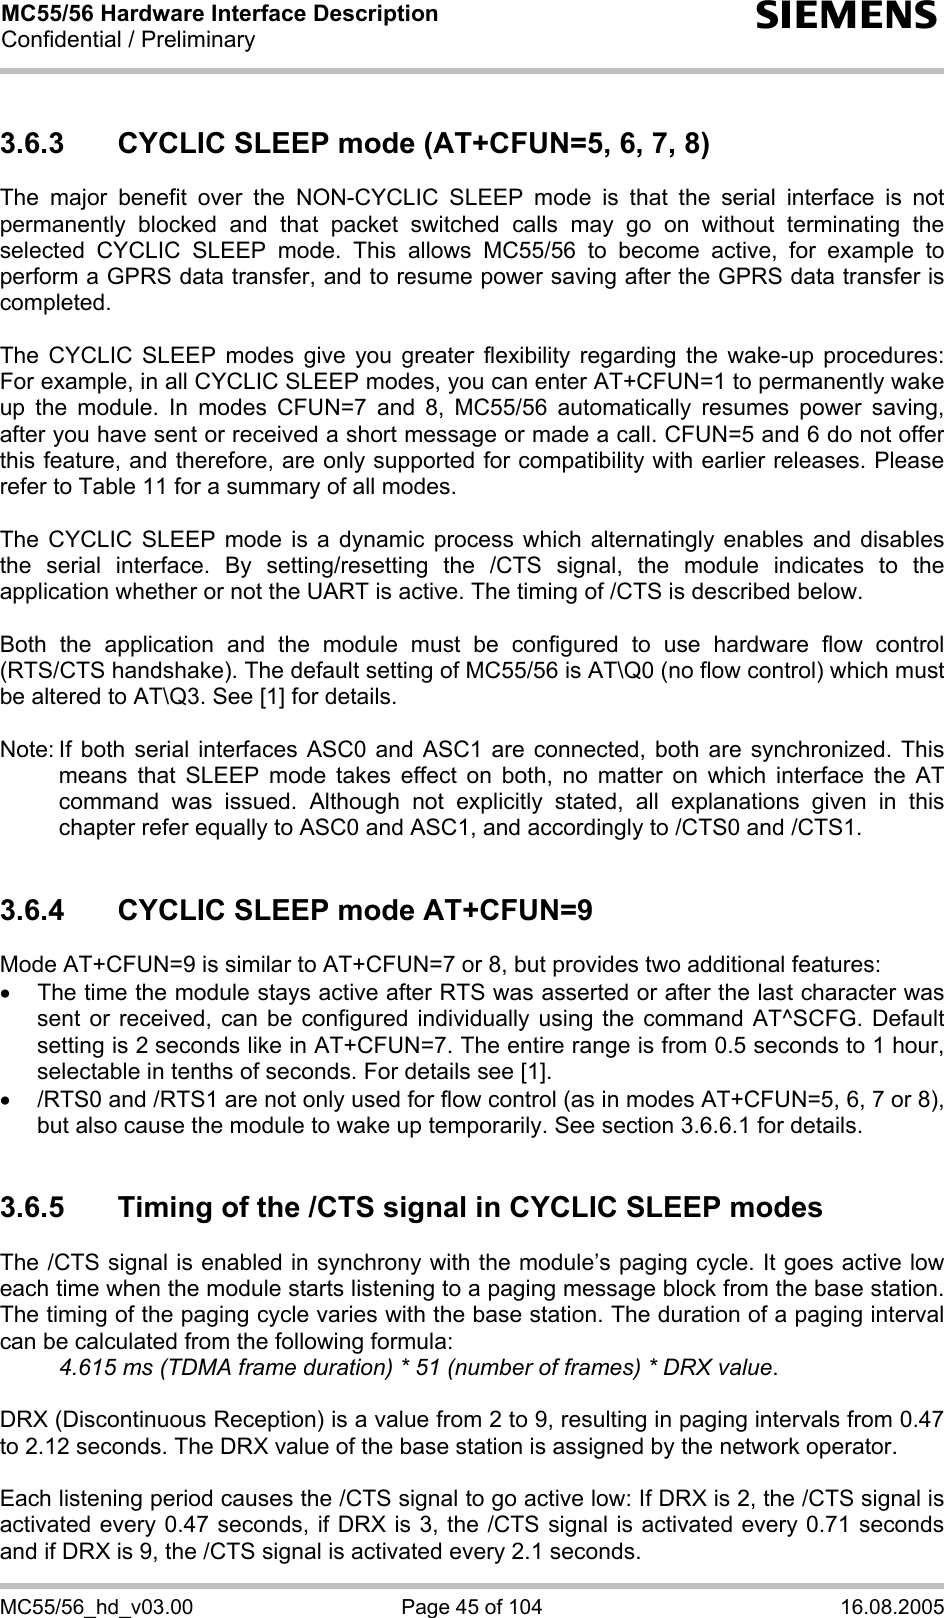 MC55/56 Hardware Interface Description Confidential / Preliminary s MC55/56_hd_v03.00  Page 45 of 104  16.08.2005 3.6.3  CYCLIC SLEEP mode (AT+CFUN=5, 6, 7, 8) The major benefit over the NON-CYCLIC SLEEP mode is that the serial interface is not permanently blocked and that packet switched calls may go on without terminating the selected CYCLIC SLEEP mode. This allows MC55/56 to become active, for example to perform a GPRS data transfer, and to resume power saving after the GPRS data transfer is completed.  The CYCLIC SLEEP modes give you greater flexibility regarding the wake-up procedures: For example, in all CYCLIC SLEEP modes, you can enter AT+CFUN=1 to permanently wake up the module. In modes CFUN=7 and 8, MC55/56 automatically resumes power saving, after you have sent or received a short message or made a call. CFUN=5 and 6 do not offer this feature, and therefore, are only supported for compatibility with earlier releases. Please refer to Table 11 for a summary of all modes.  The CYCLIC SLEEP mode is a dynamic process which alternatingly enables and disables the serial interface. By setting/resetting the /CTS signal, the module indicates to the application whether or not the UART is active. The timing of /CTS is described below.   Both the application and the module must be configured to use hardware flow control (RTS/CTS handshake). The default setting of MC55/56 is AT\Q0 (no flow control) which must be altered to AT\Q3. See [1] for details.  Note: If both serial interfaces ASC0 and ASC1 are connected, both are synchronized. This means that SLEEP mode takes effect on both, no matter on which interface the AT command was issued. Although not explicitly stated, all explanations given in this chapter refer equally to ASC0 and ASC1, and accordingly to /CTS0 and /CTS1.   3.6.4  CYCLIC SLEEP mode AT+CFUN=9 Mode AT+CFUN=9 is similar to AT+CFUN=7 or 8, but provides two additional features:  •  The time the module stays active after RTS was asserted or after the last character was sent or received, can be configured individually using the command AT^SCFG. Default setting is 2 seconds like in AT+CFUN=7. The entire range is from 0.5 seconds to 1 hour, selectable in tenths of seconds. For details see [1]. •  /RTS0 and /RTS1 are not only used for flow control (as in modes AT+CFUN=5, 6, 7 or 8), but also cause the module to wake up temporarily. See section 3.6.6.1 for details.  3.6.5  Timing of the /CTS signal in CYCLIC SLEEP modes The /CTS signal is enabled in synchrony with the module’s paging cycle. It goes active low each time when the module starts listening to a paging message block from the base station. The timing of the paging cycle varies with the base station. The duration of a paging interval can be calculated from the following formula:  4.615 ms (TDMA frame duration) * 51 (number of frames) * DRX value.   DRX (Discontinuous Reception) is a value from 2 to 9, resulting in paging intervals from 0.47 to 2.12 seconds. The DRX value of the base station is assigned by the network operator.   Each listening period causes the /CTS signal to go active low: If DRX is 2, the /CTS signal is activated every 0.47 seconds, if DRX is 3, the /CTS signal is activated every 0.71 seconds and if DRX is 9, the /CTS signal is activated every 2.1 seconds. 